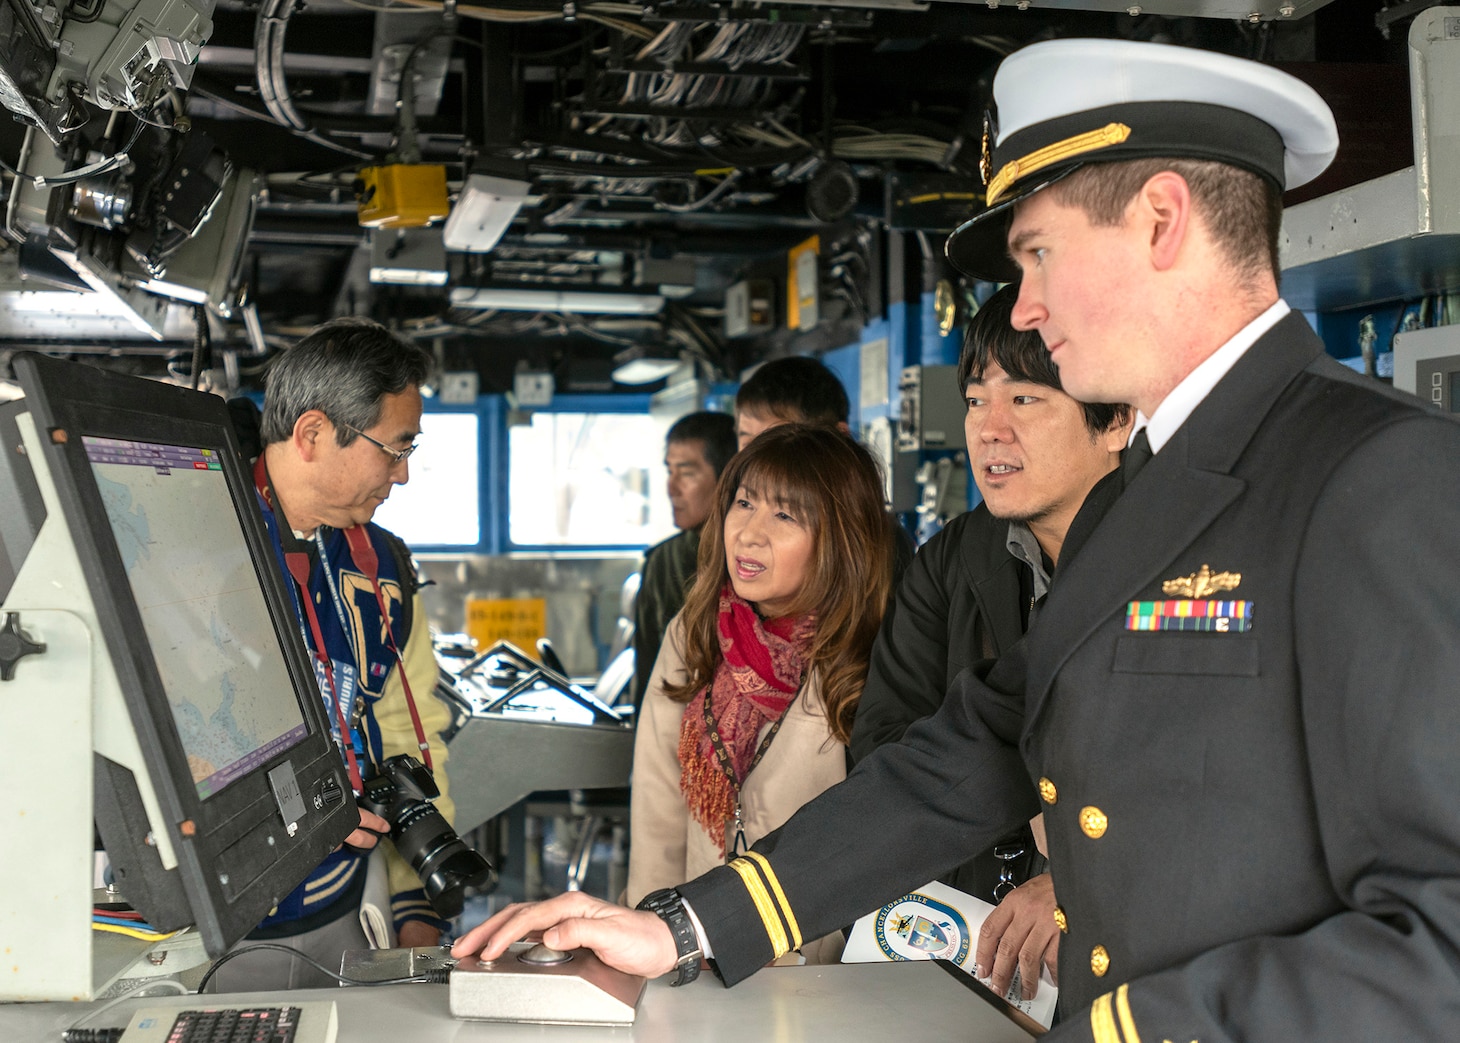 LTJG Brandon Vitton gives Japanese media a tour of the Ticonderoga-class guided-missile cruiser USS Chancellorsville’s (CG 62) bridge on March 30. Chancellorsville, which is forward deployed at U.S. Fleet Activities Yokosuka, welcomed media and thousands of other Japanese guests during the installation’s 26th annual Spring Festival. Fleet Activities Yokosuka provides, maintains, and operates base facilities and services in support of 7th Fleet's forward-deployed naval forces, 71 tenant commands, and more than 27,000 military and civilian personnel.